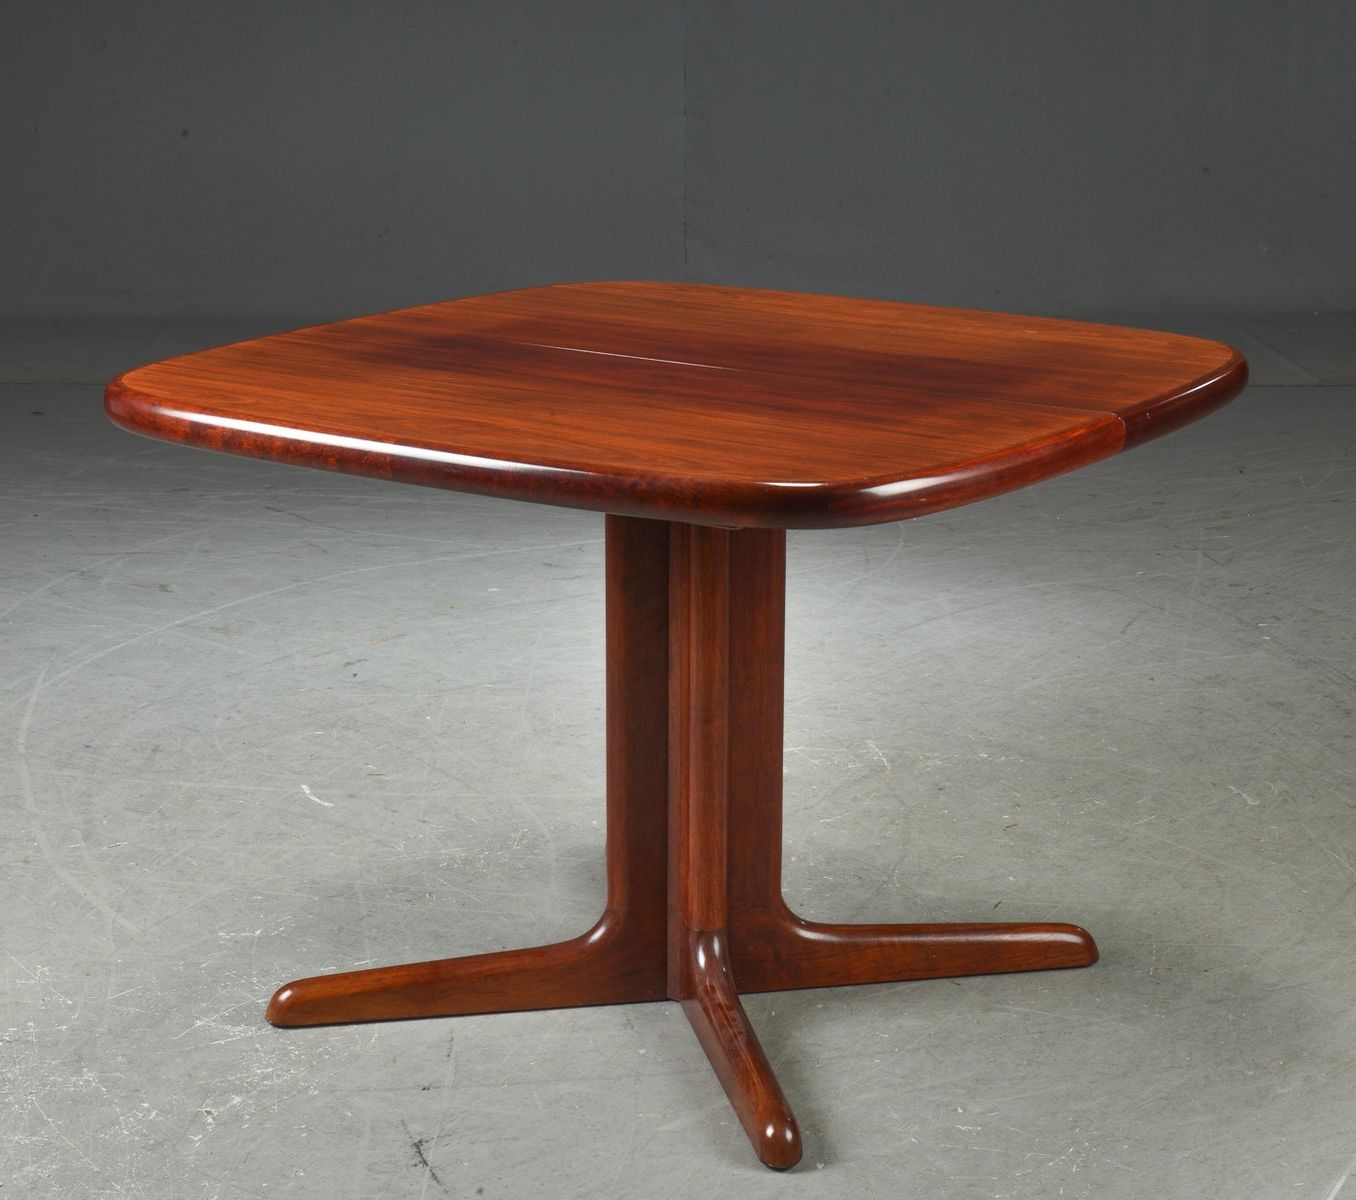 Widely Used Extendable Mahogany Dining Table From Skovby, 1970s For With Regard To Mahogany Dining Tables (View 15 of 20)